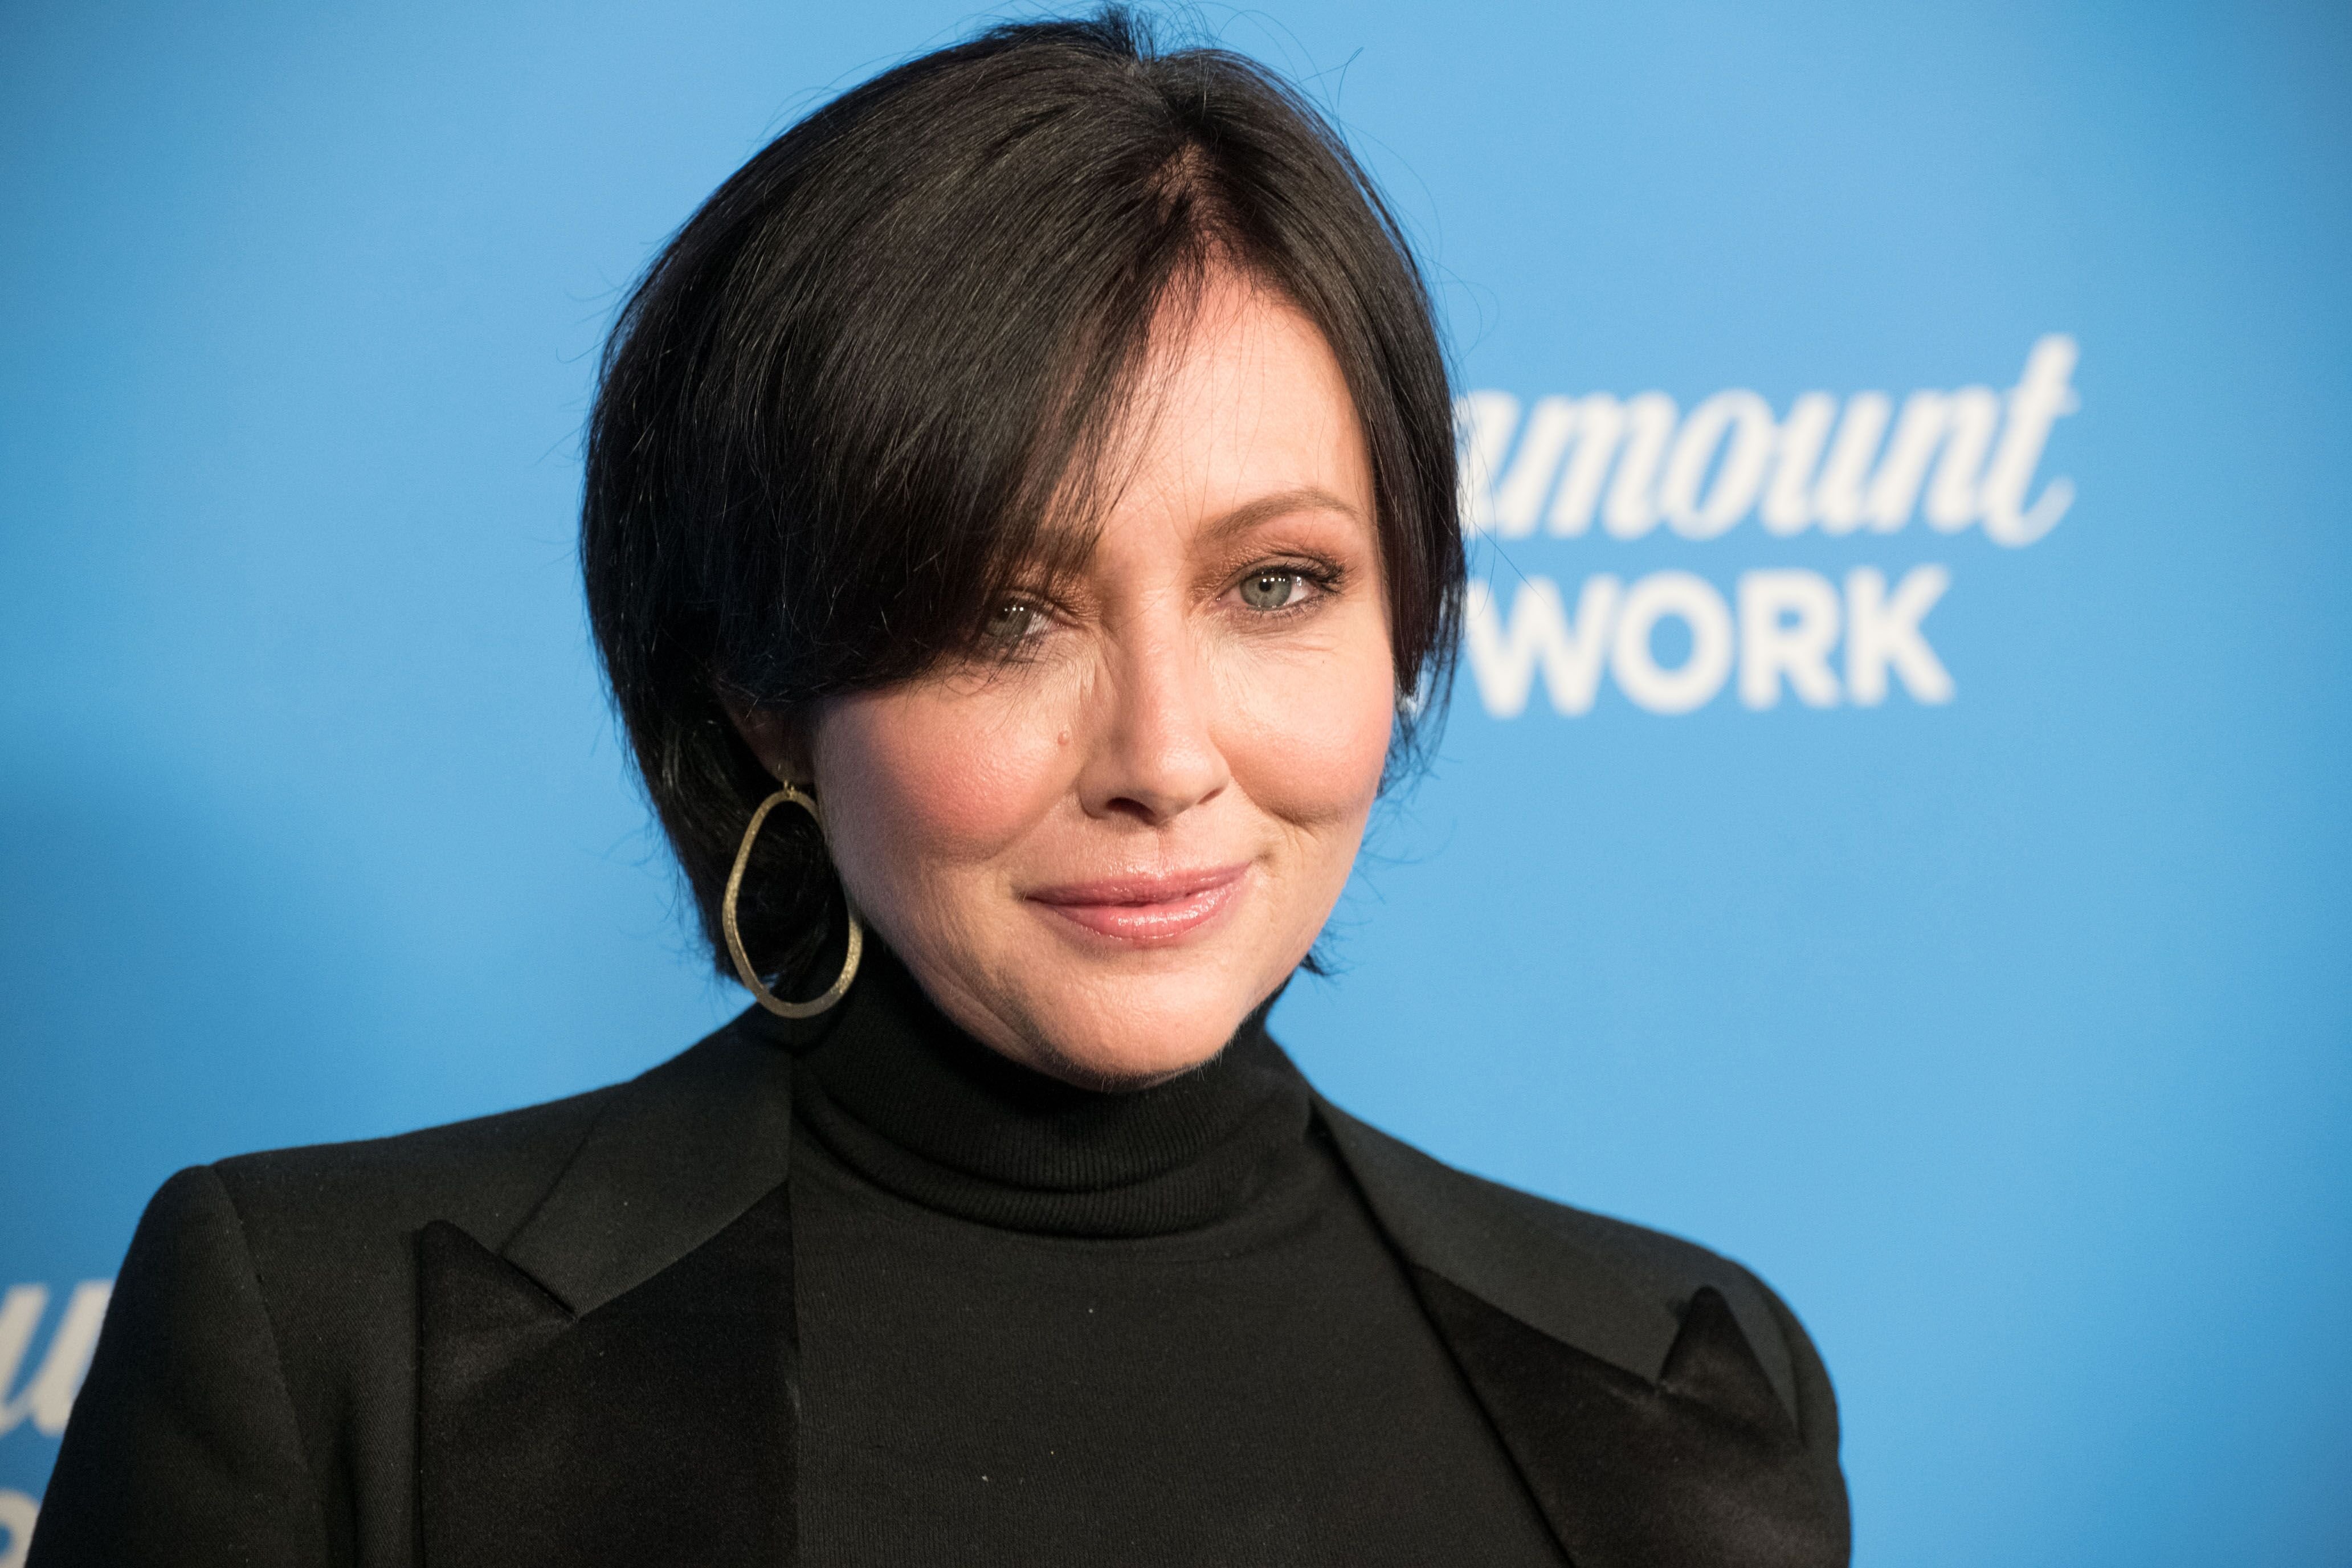 Shannen Doherty attends Paramount Network Launch Party at Sunset Tower in Los Angeles, California | Photo: Getty Images